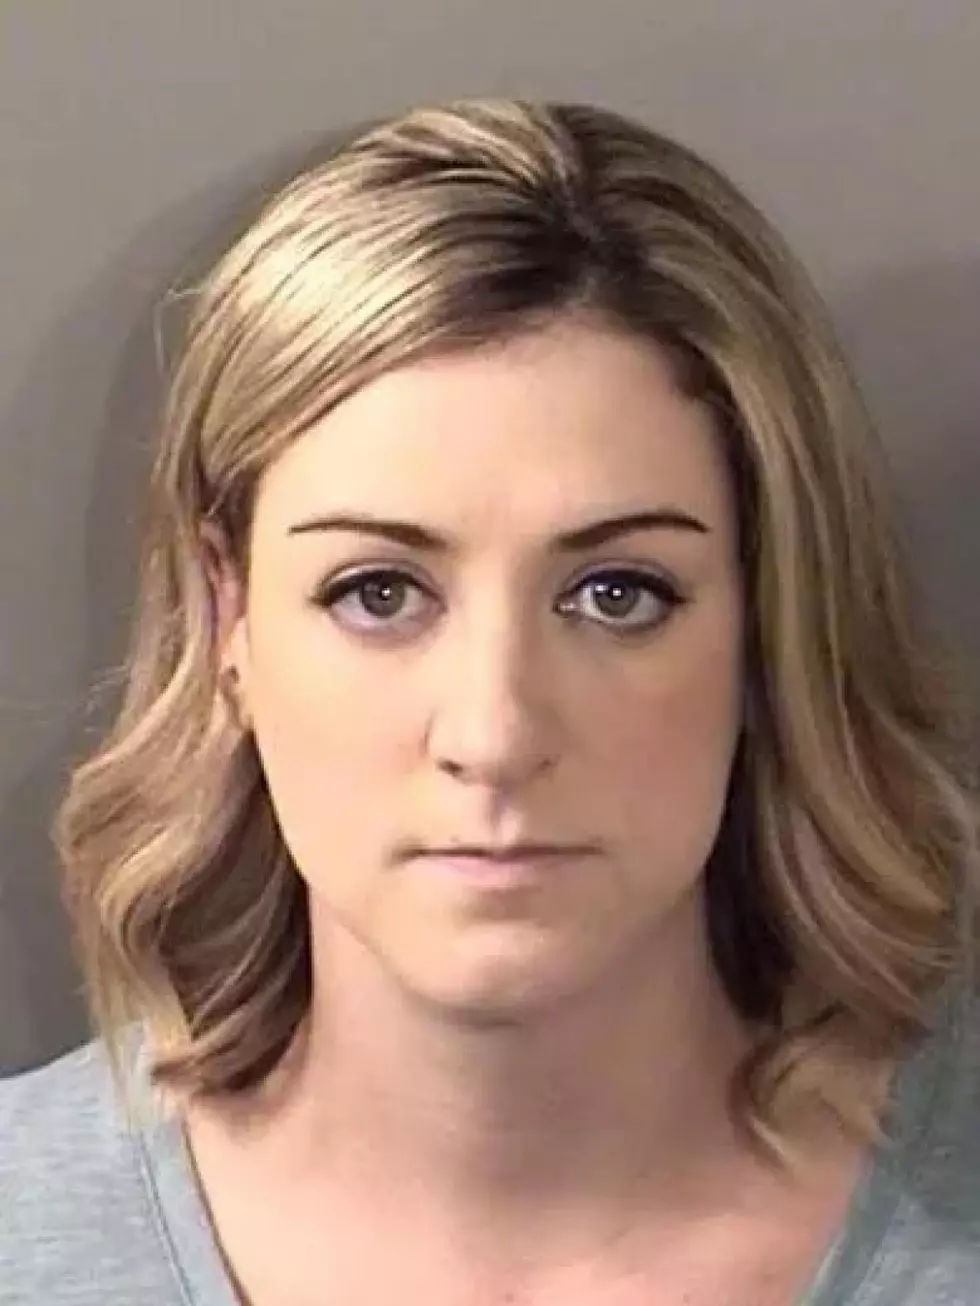 Pregnant Texas Teacher Accused of Having Sex with 15-Year-Old